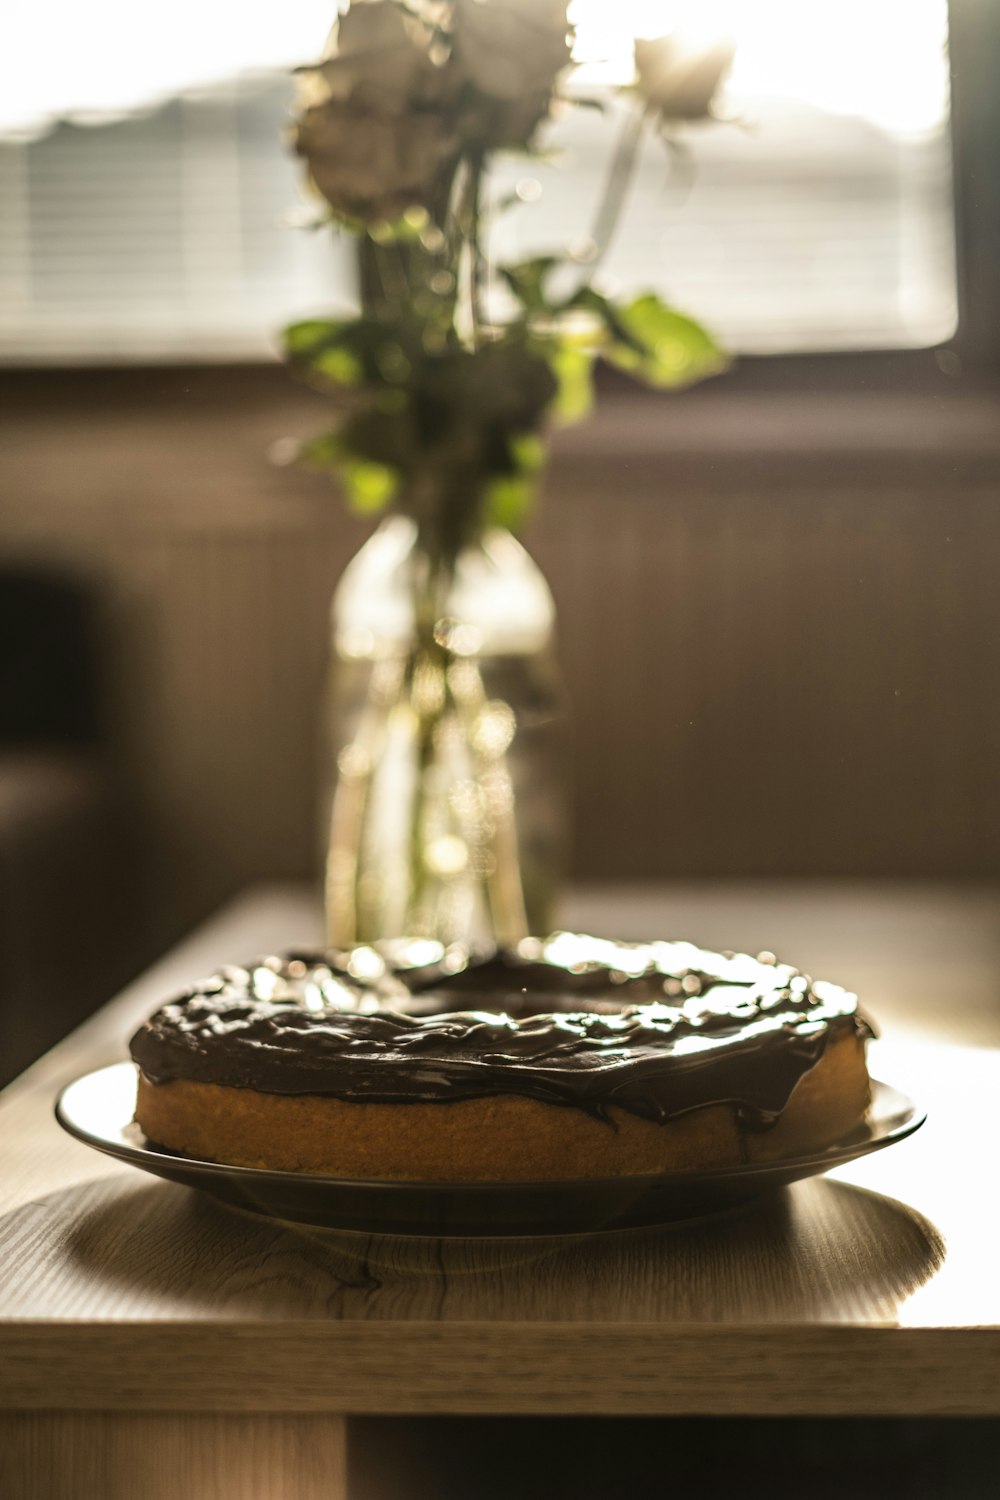 a cake sitting on a table next to a vase of flowers